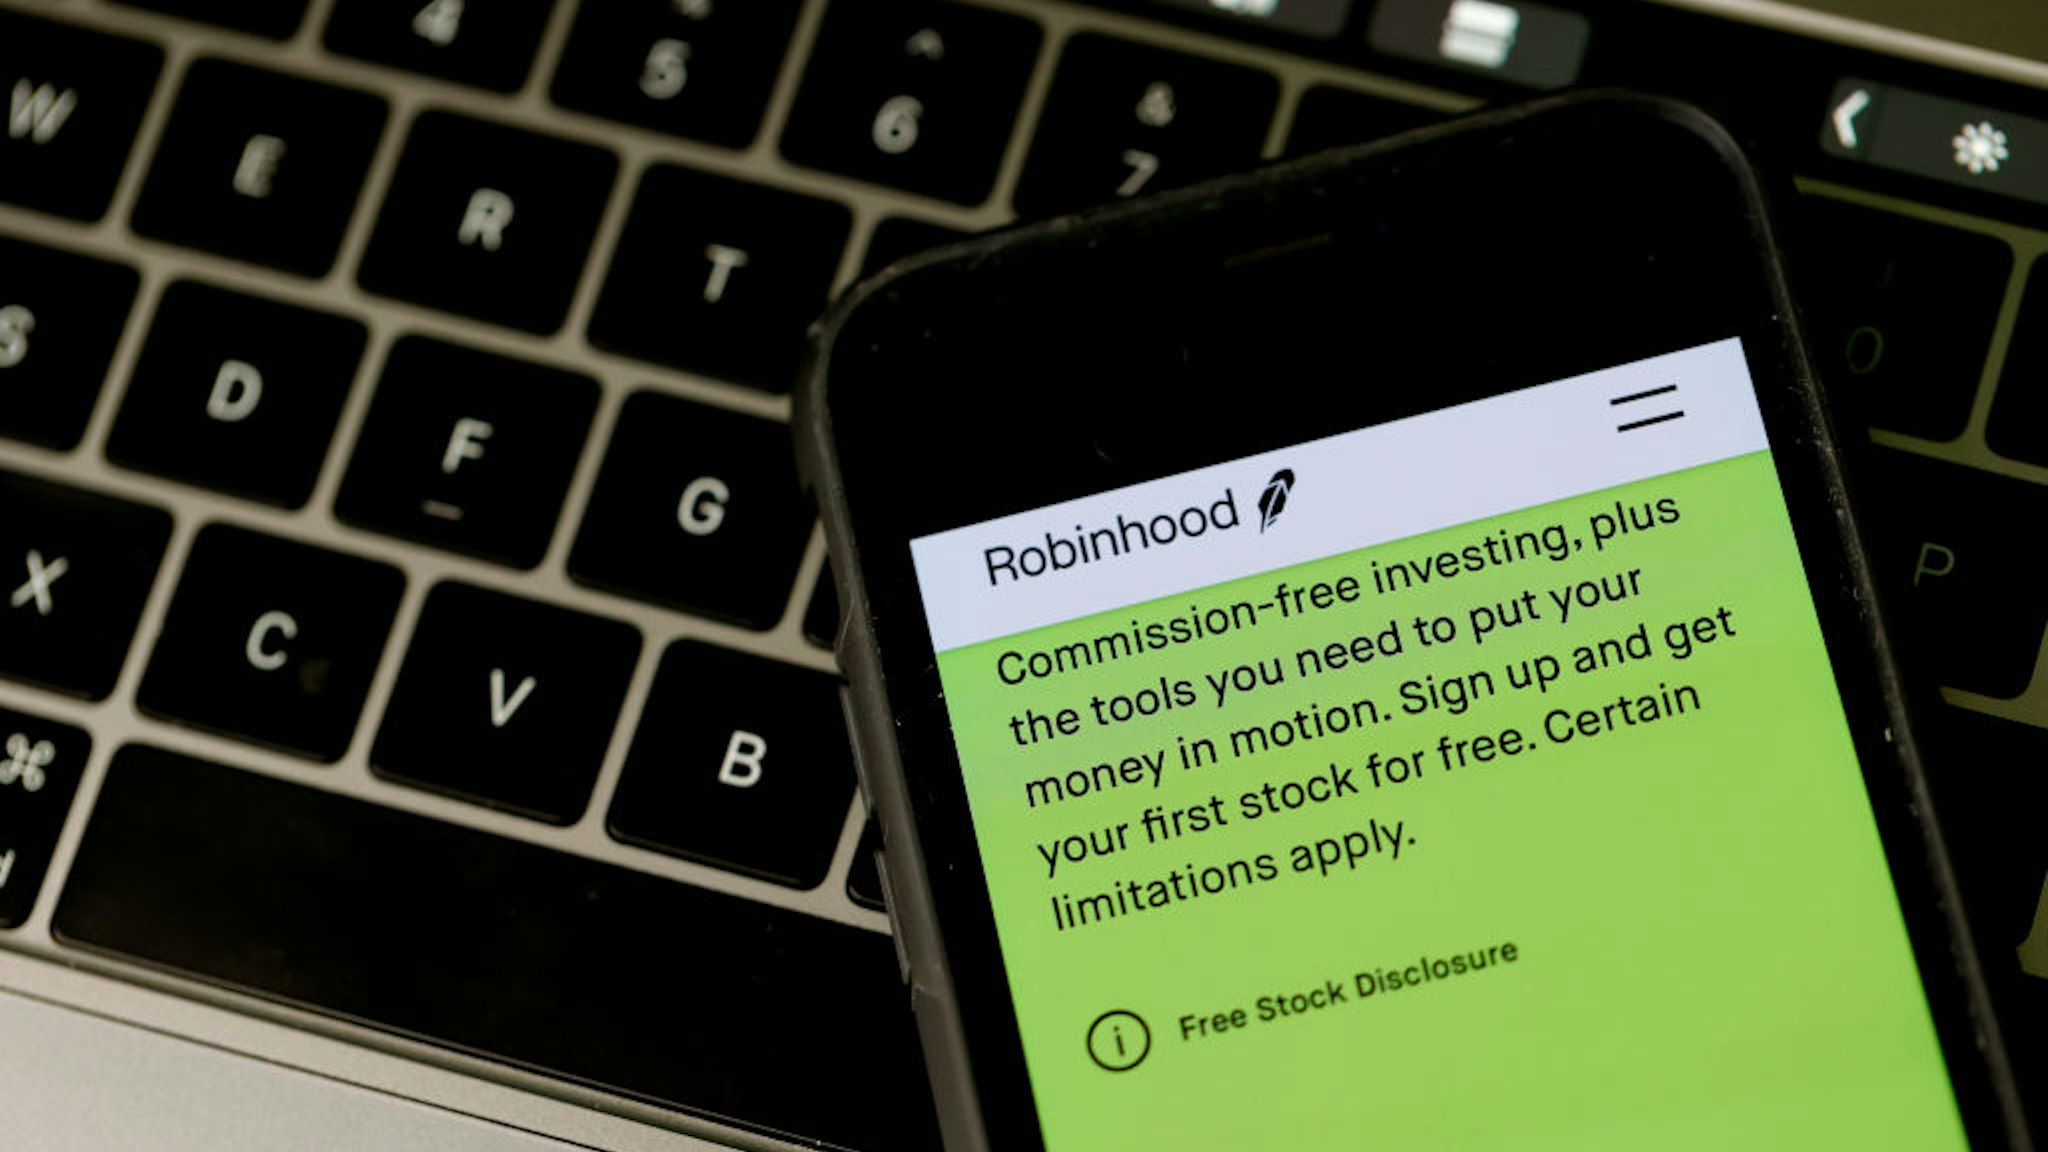 SAN ANSELMO, CALIFORNIA - DECEMBER 17: In this photo illustration, a notification about commission-free trading is displayed on the Robinhood application on December 17, 2020 in San Anselmo, California. The Securities and Exchange Commission has charged Silicon Valley start-up company Robinhood with deceiving customers about how the company makes money. The company has agreed to pay a $65 million civil penalty. (Photo Illustration by Justin Sullivan/Getty Images)